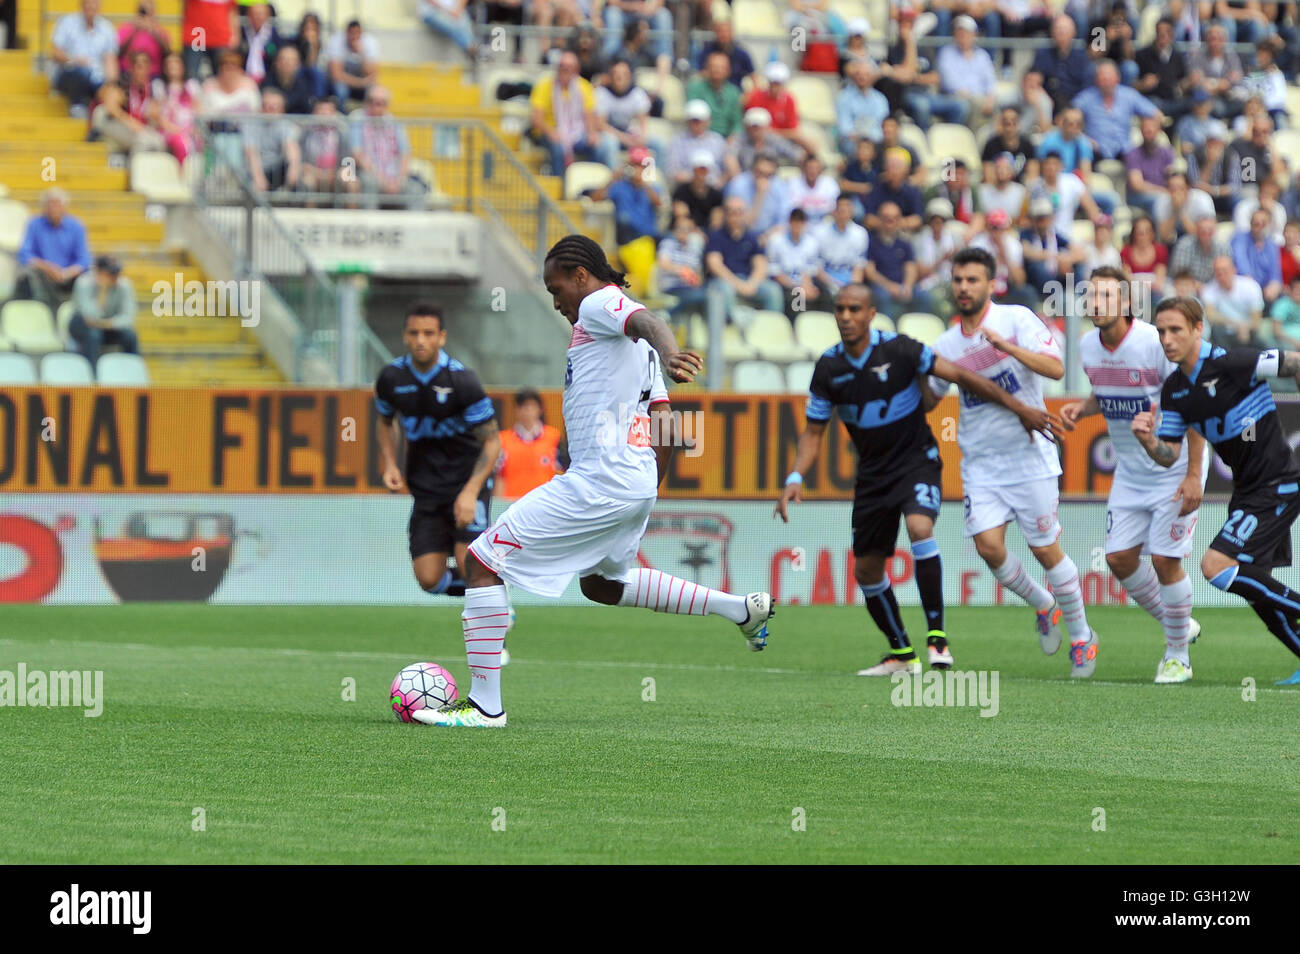 Modena, Italy. 08th May, 2016. Jerry Uche Mbakogu Carpi's forward. Jerry Uche Mbakogu takes the penalty that will be saved by Lazio's goalkeeper Federico Marchetti during the Serie A football match between FC Carpi and SS Lazio at Braglia Stadium in Modena. Lazio beat by 3 to 1 on Carpi at the end of a race during which the Carpi missed two penalties with Nigerian forward Jerry Uche Mbakogu. © Massimo Morelli/Pacific Press/Alamy Live News Stock Photo